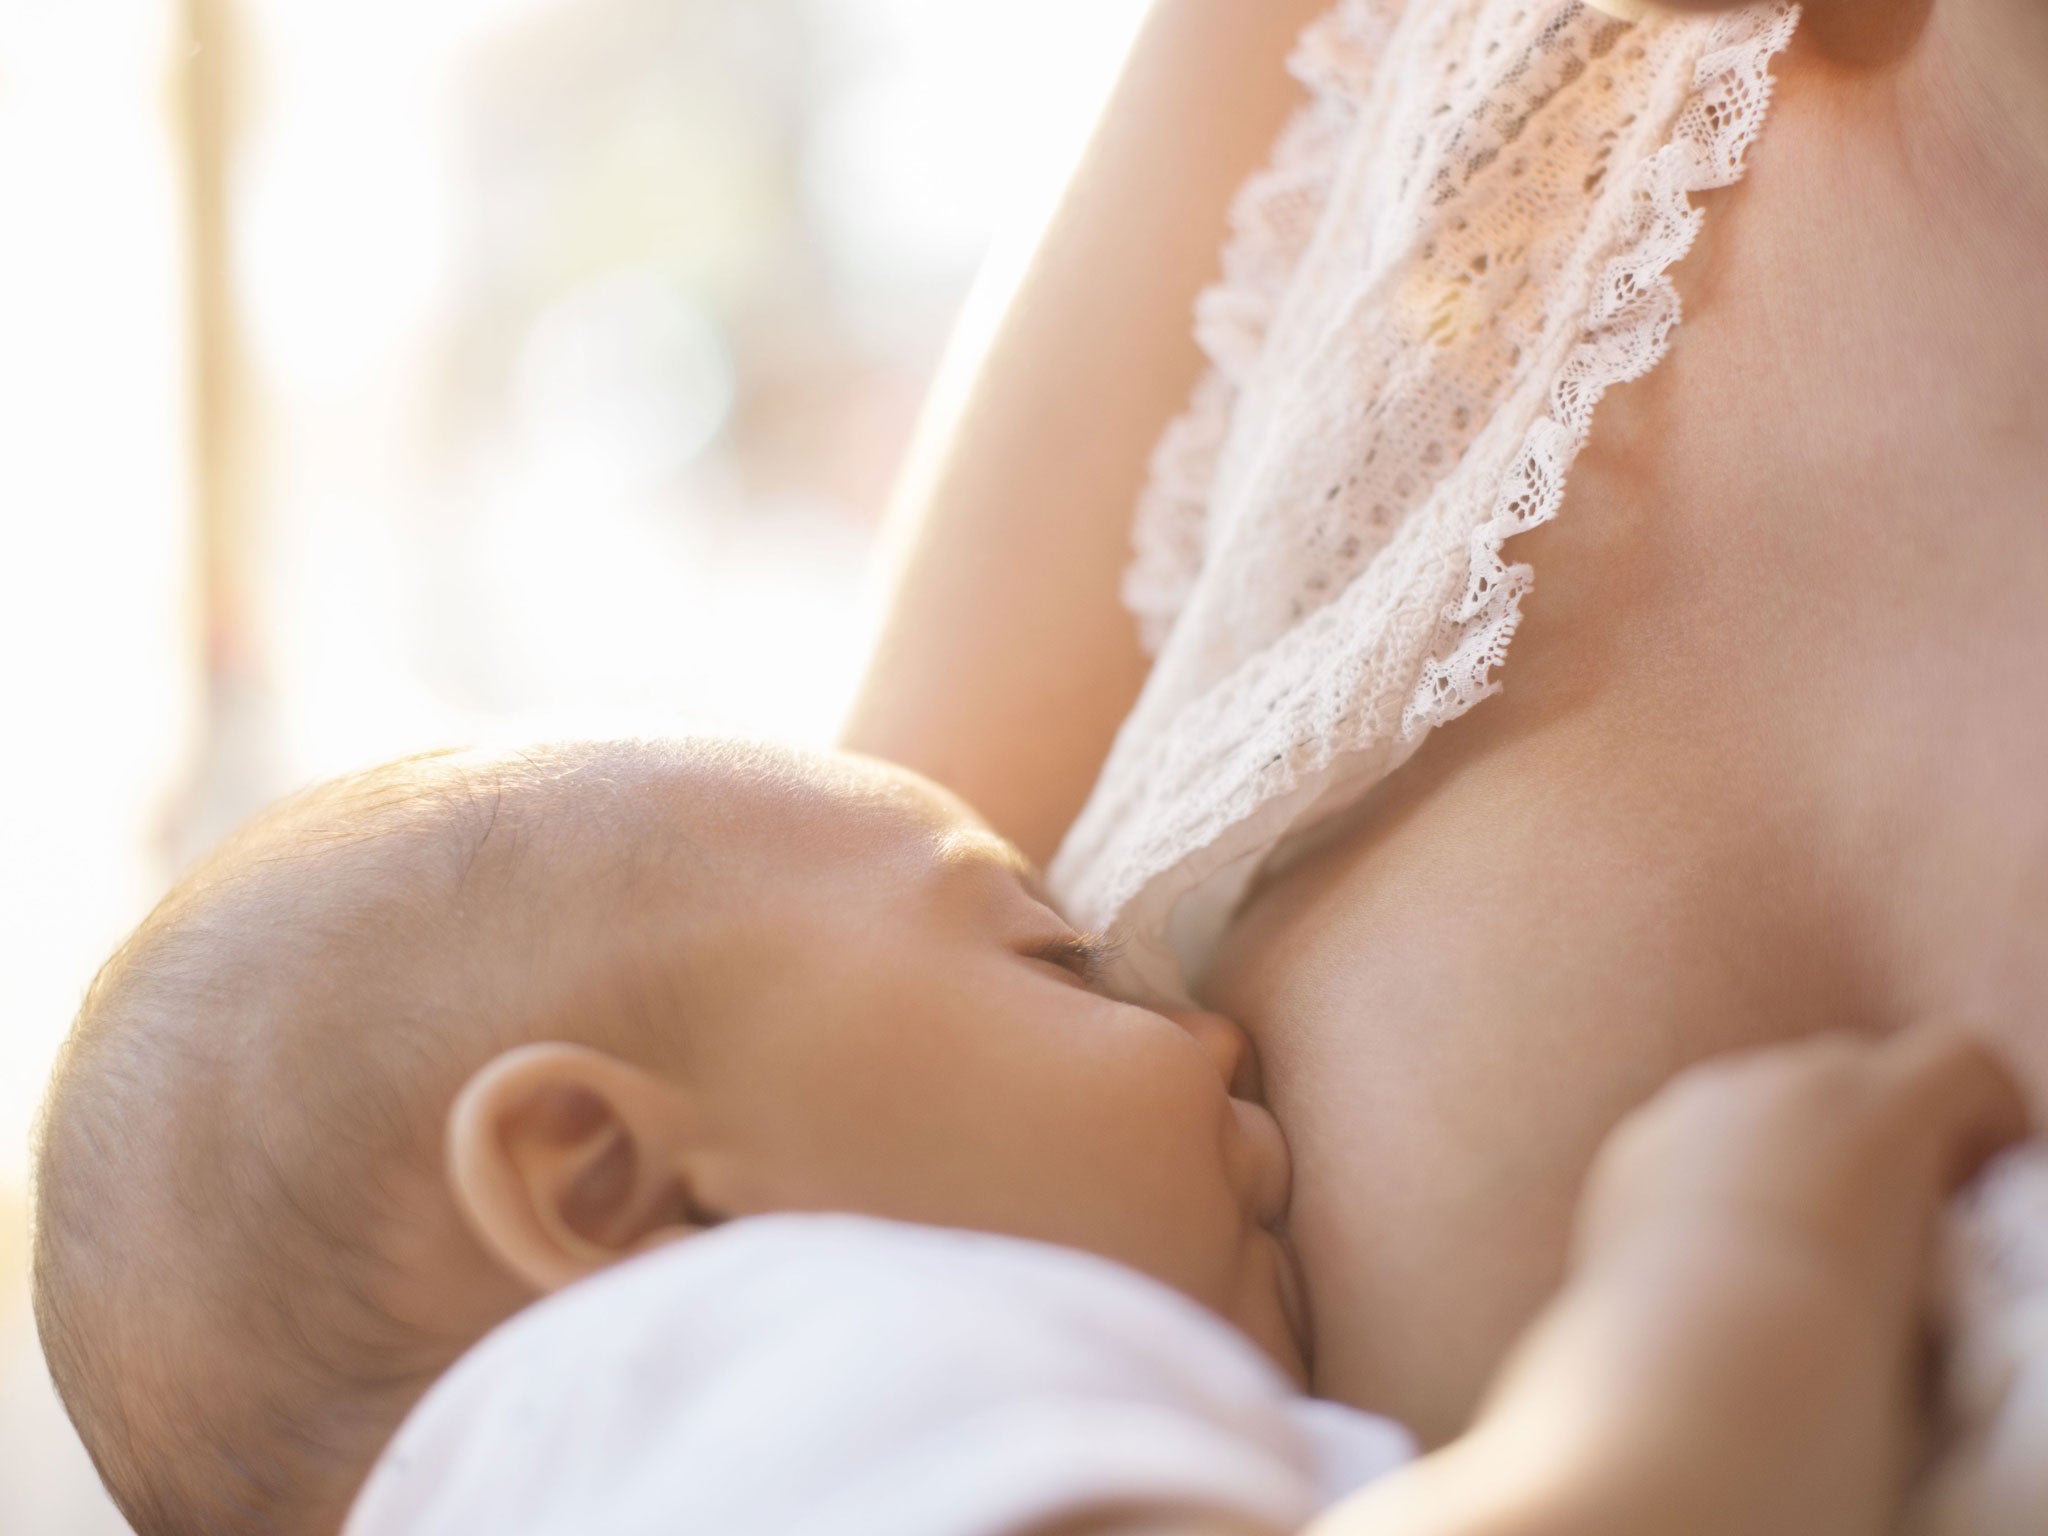 Babies who are breastfed have a lower risk of developing infections of the gut and airways